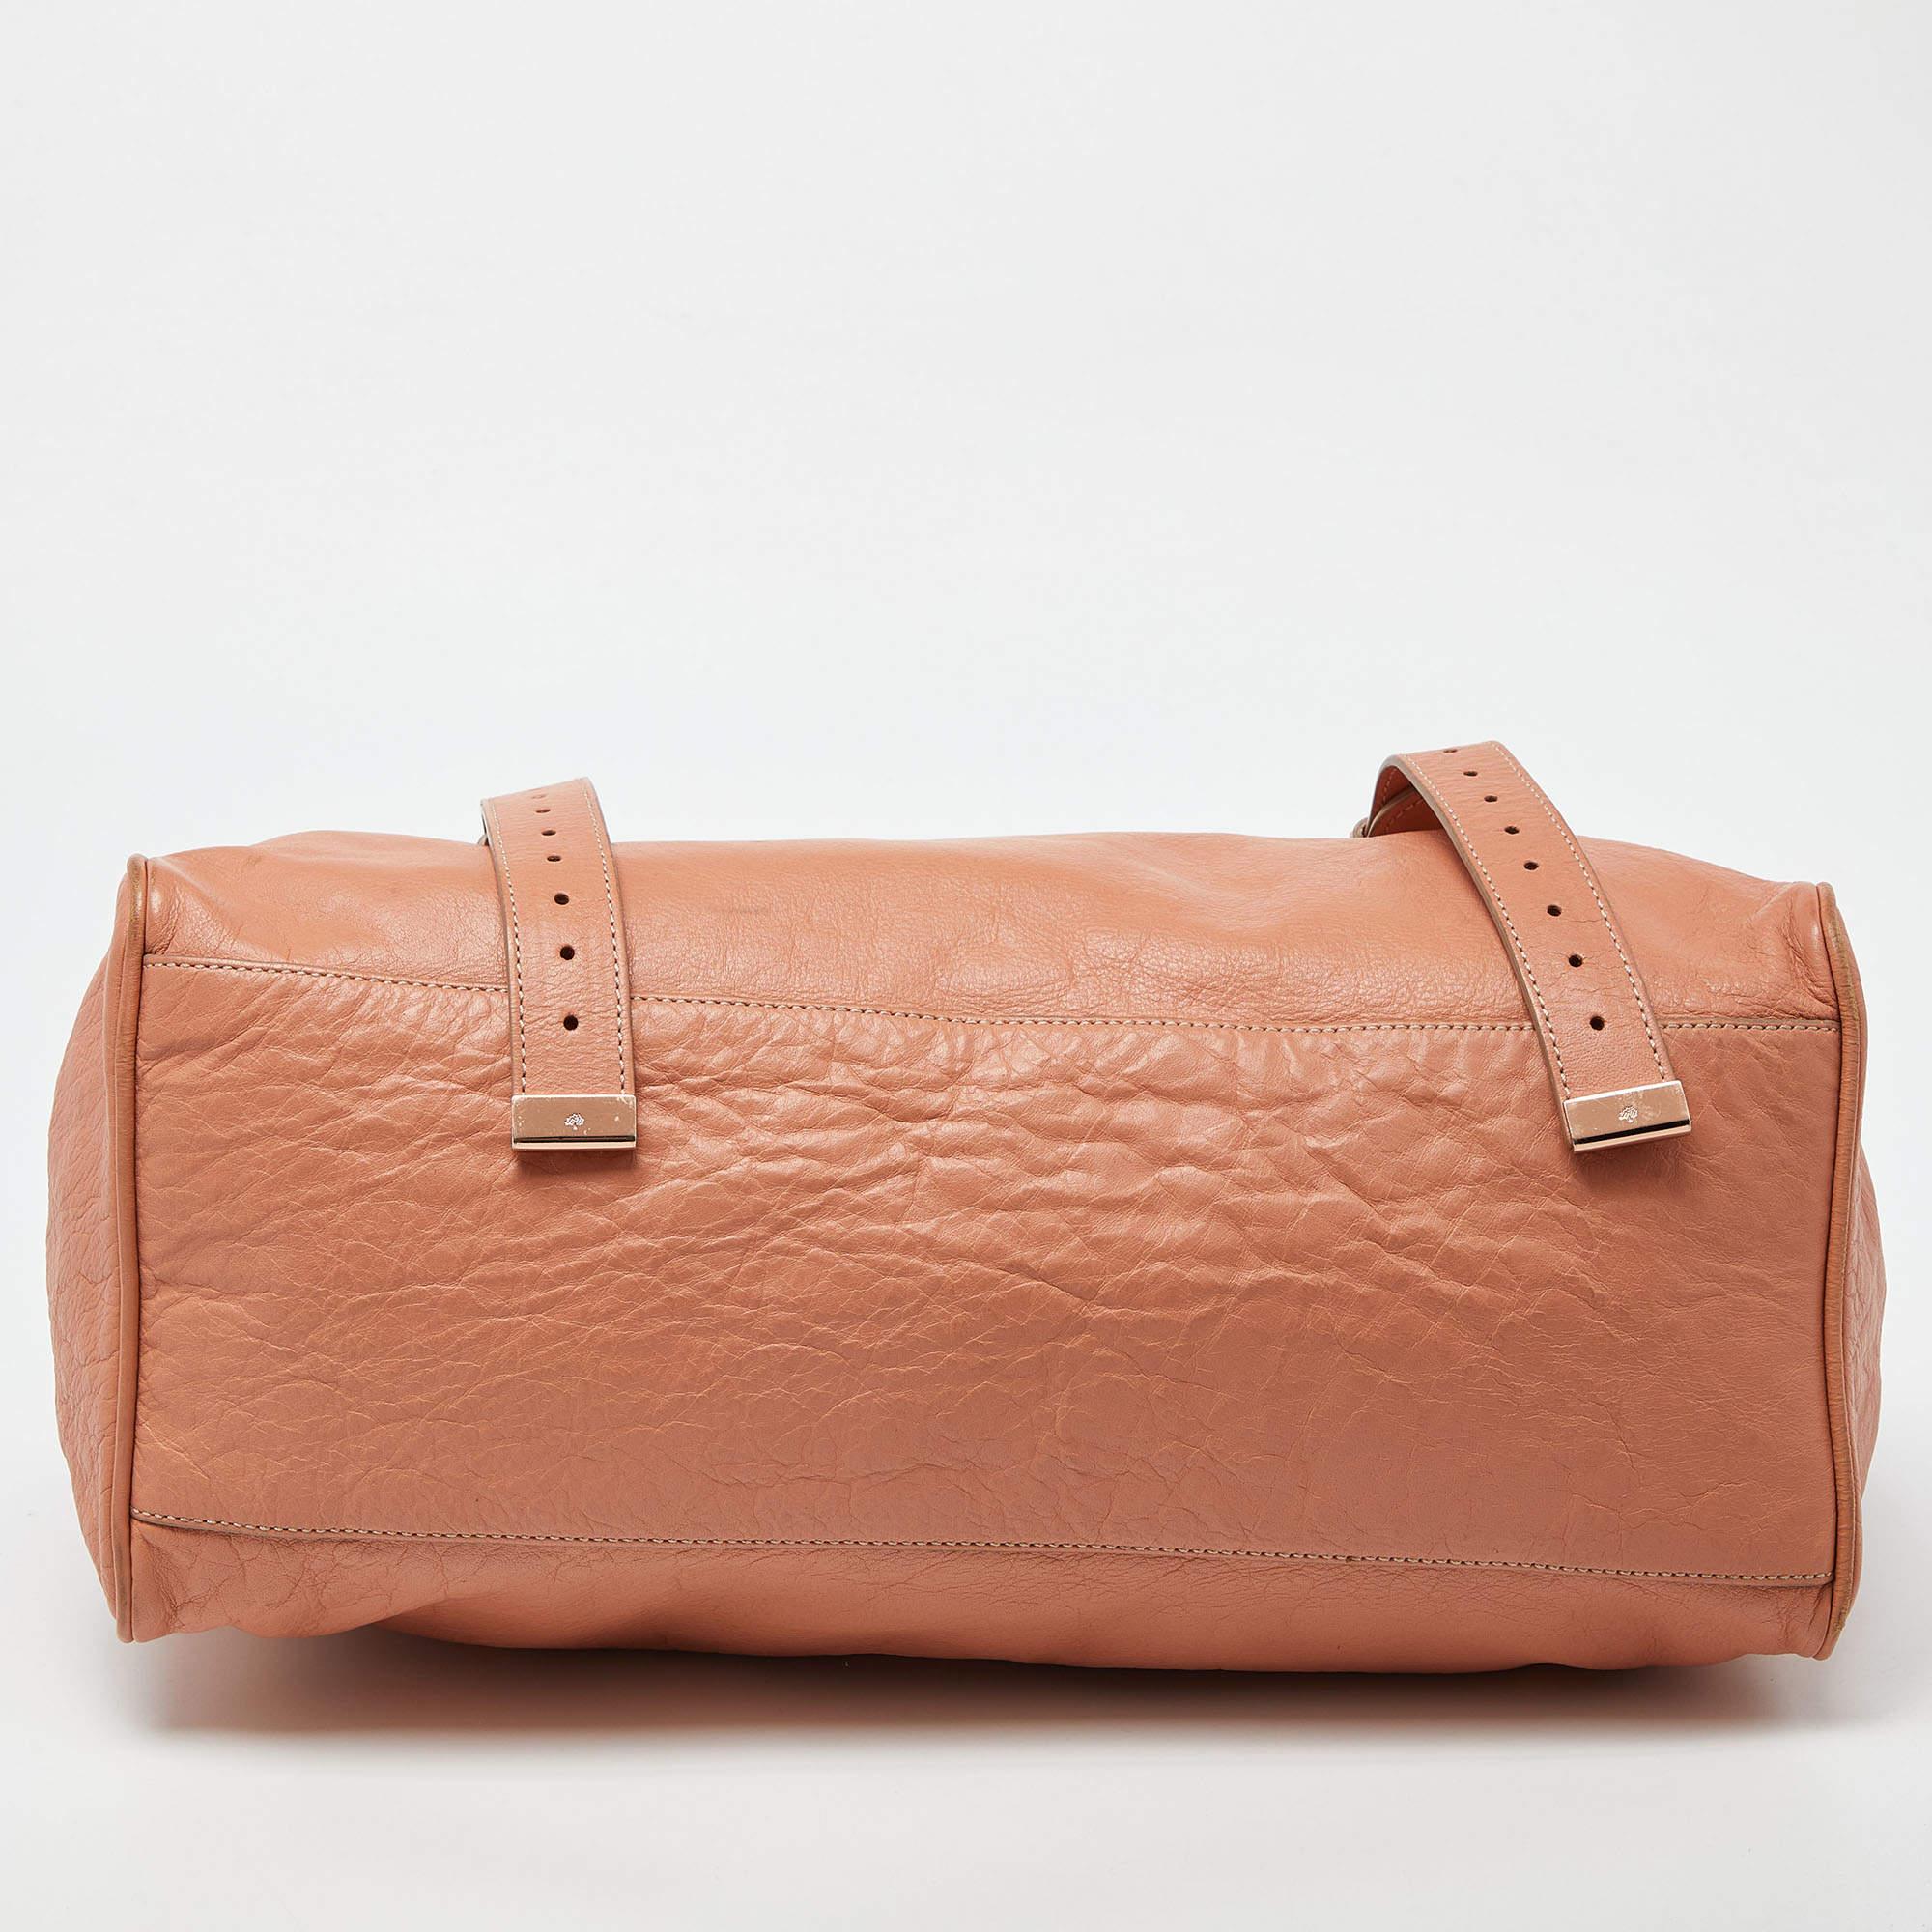 Mulberry Peach Leather Oversized Alexa Satchel For Sale 3